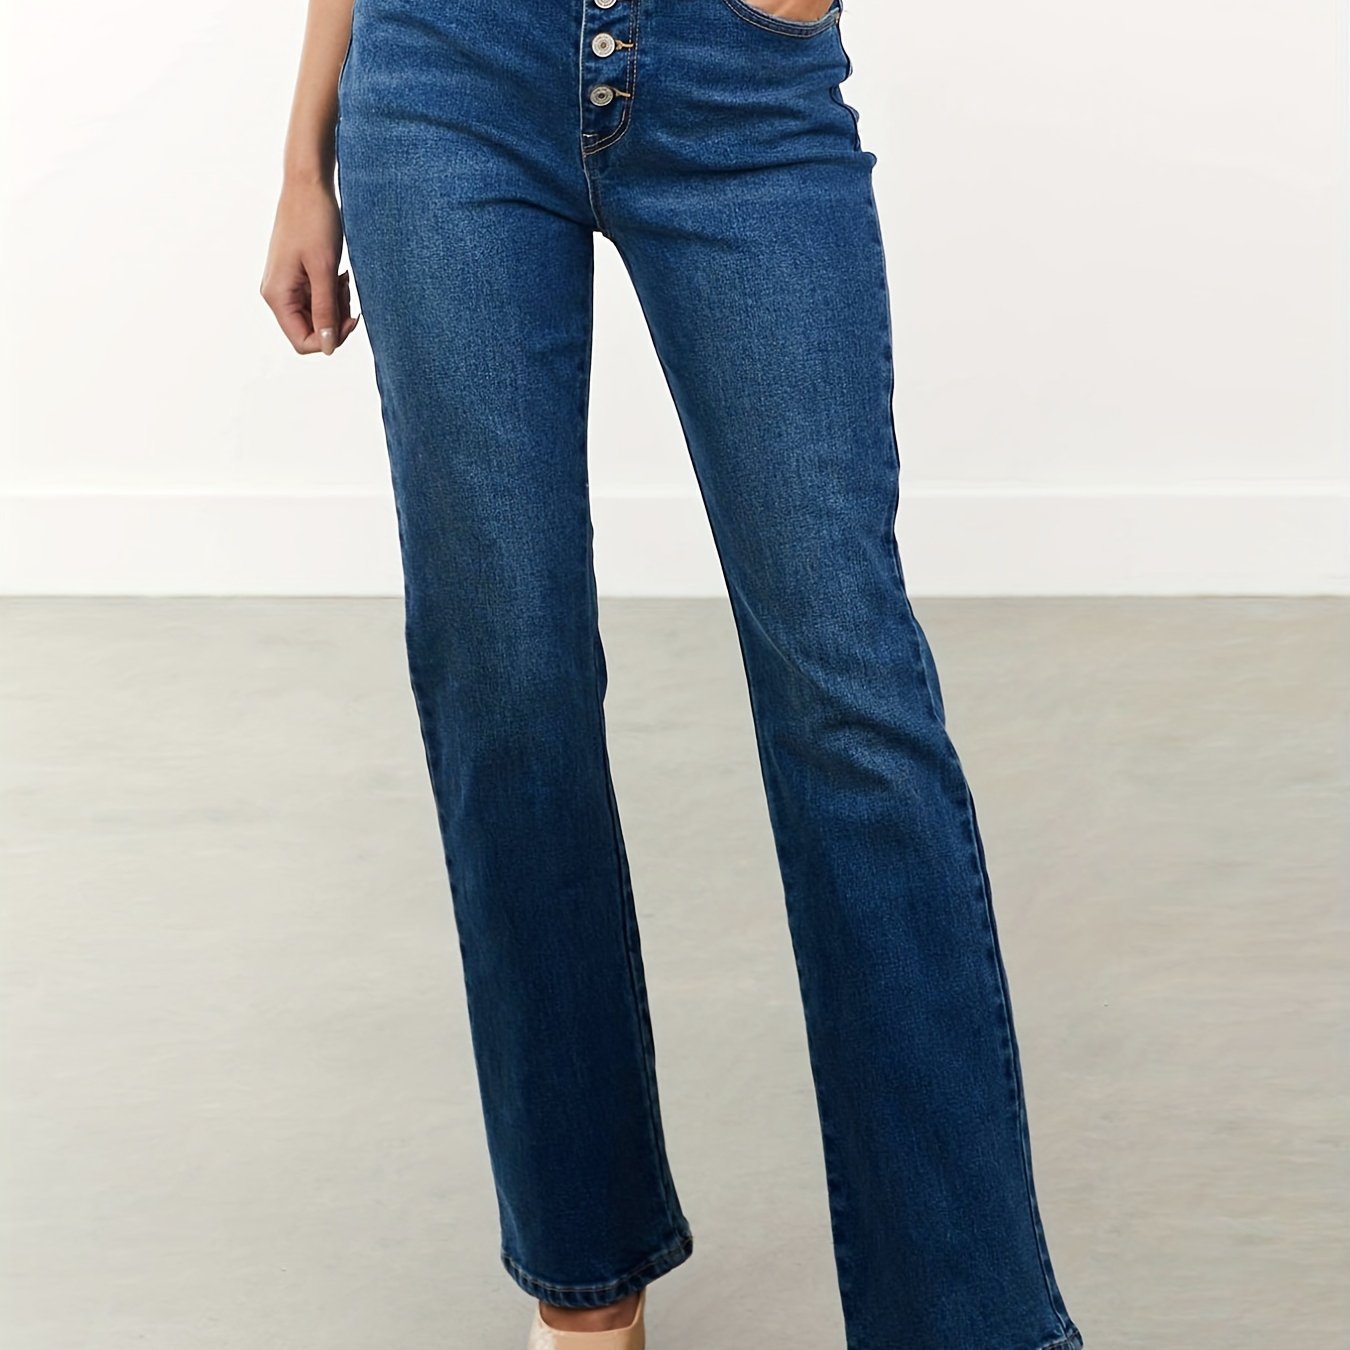 「lovevop」Single-breasted Mid Rise Bootcut Jeans, Whiskering High Strech Bell Bottoms Denim Pants, Elegant Pants For Every Day, Women's Denim Jeans & Clothing